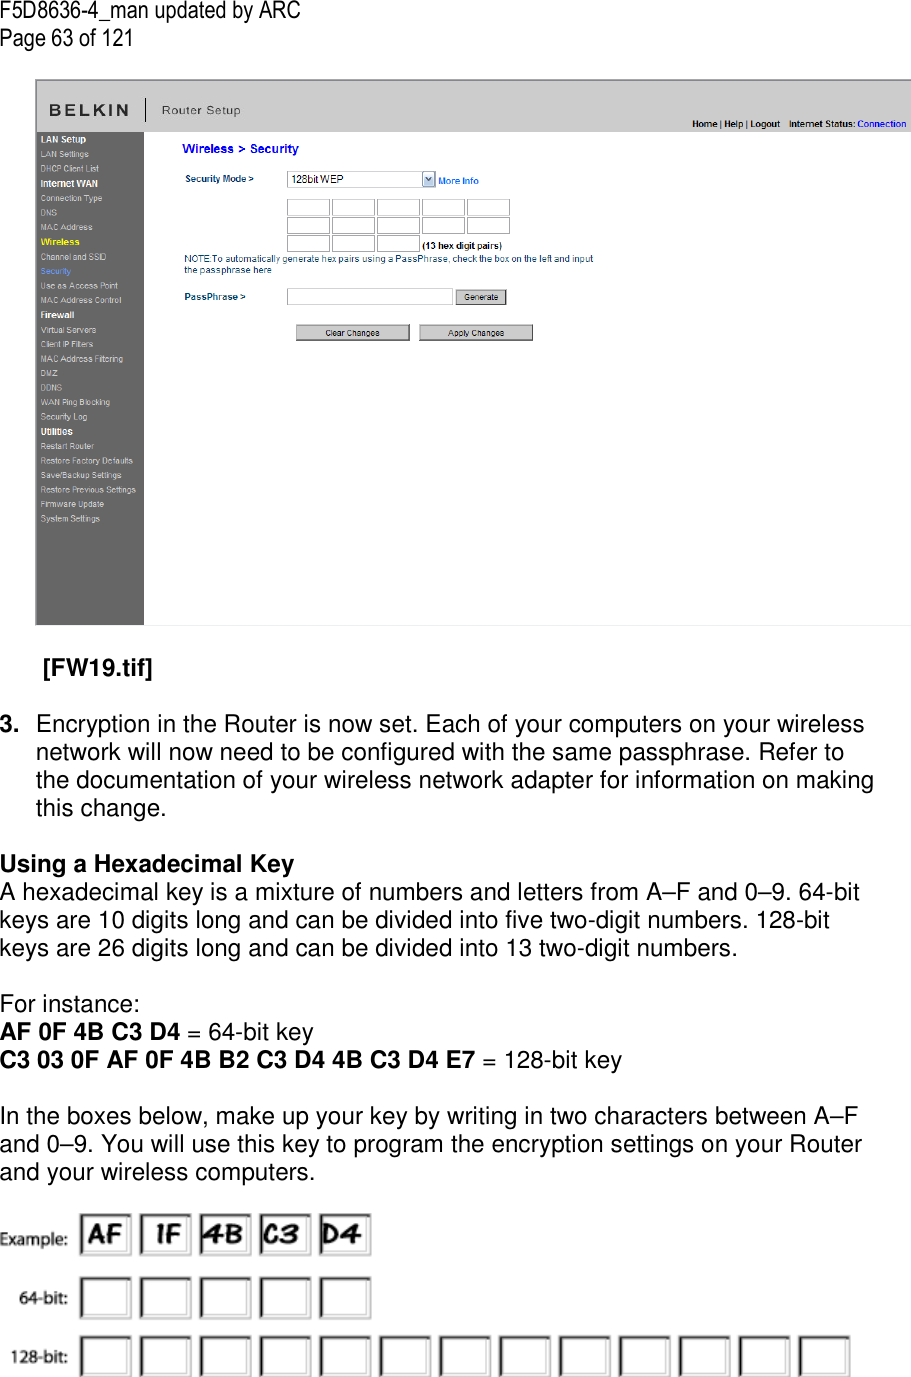 F5D8636-4_man updated by ARC Page 63 of 121    [FW19.tif]  3.  Encryption in the Router is now set. Each of your computers on your wireless network will now need to be configured with the same passphrase. Refer to the documentation of your wireless network adapter for information on making this change.  Using a Hexadecimal Key A hexadecimal key is a mixture of numbers and letters from A–F and 0–9. 64-bit keys are 10 digits long and can be divided into five two-digit numbers. 128-bit keys are 26 digits long and can be divided into 13 two-digit numbers.   For instance: AF 0F 4B C3 D4 = 64-bit key C3 03 0F AF 0F 4B B2 C3 D4 4B C3 D4 E7 = 128-bit key  In the boxes below, make up your key by writing in two characters between A–F and 0–9. You will use this key to program the encryption settings on your Router and your wireless computers.   